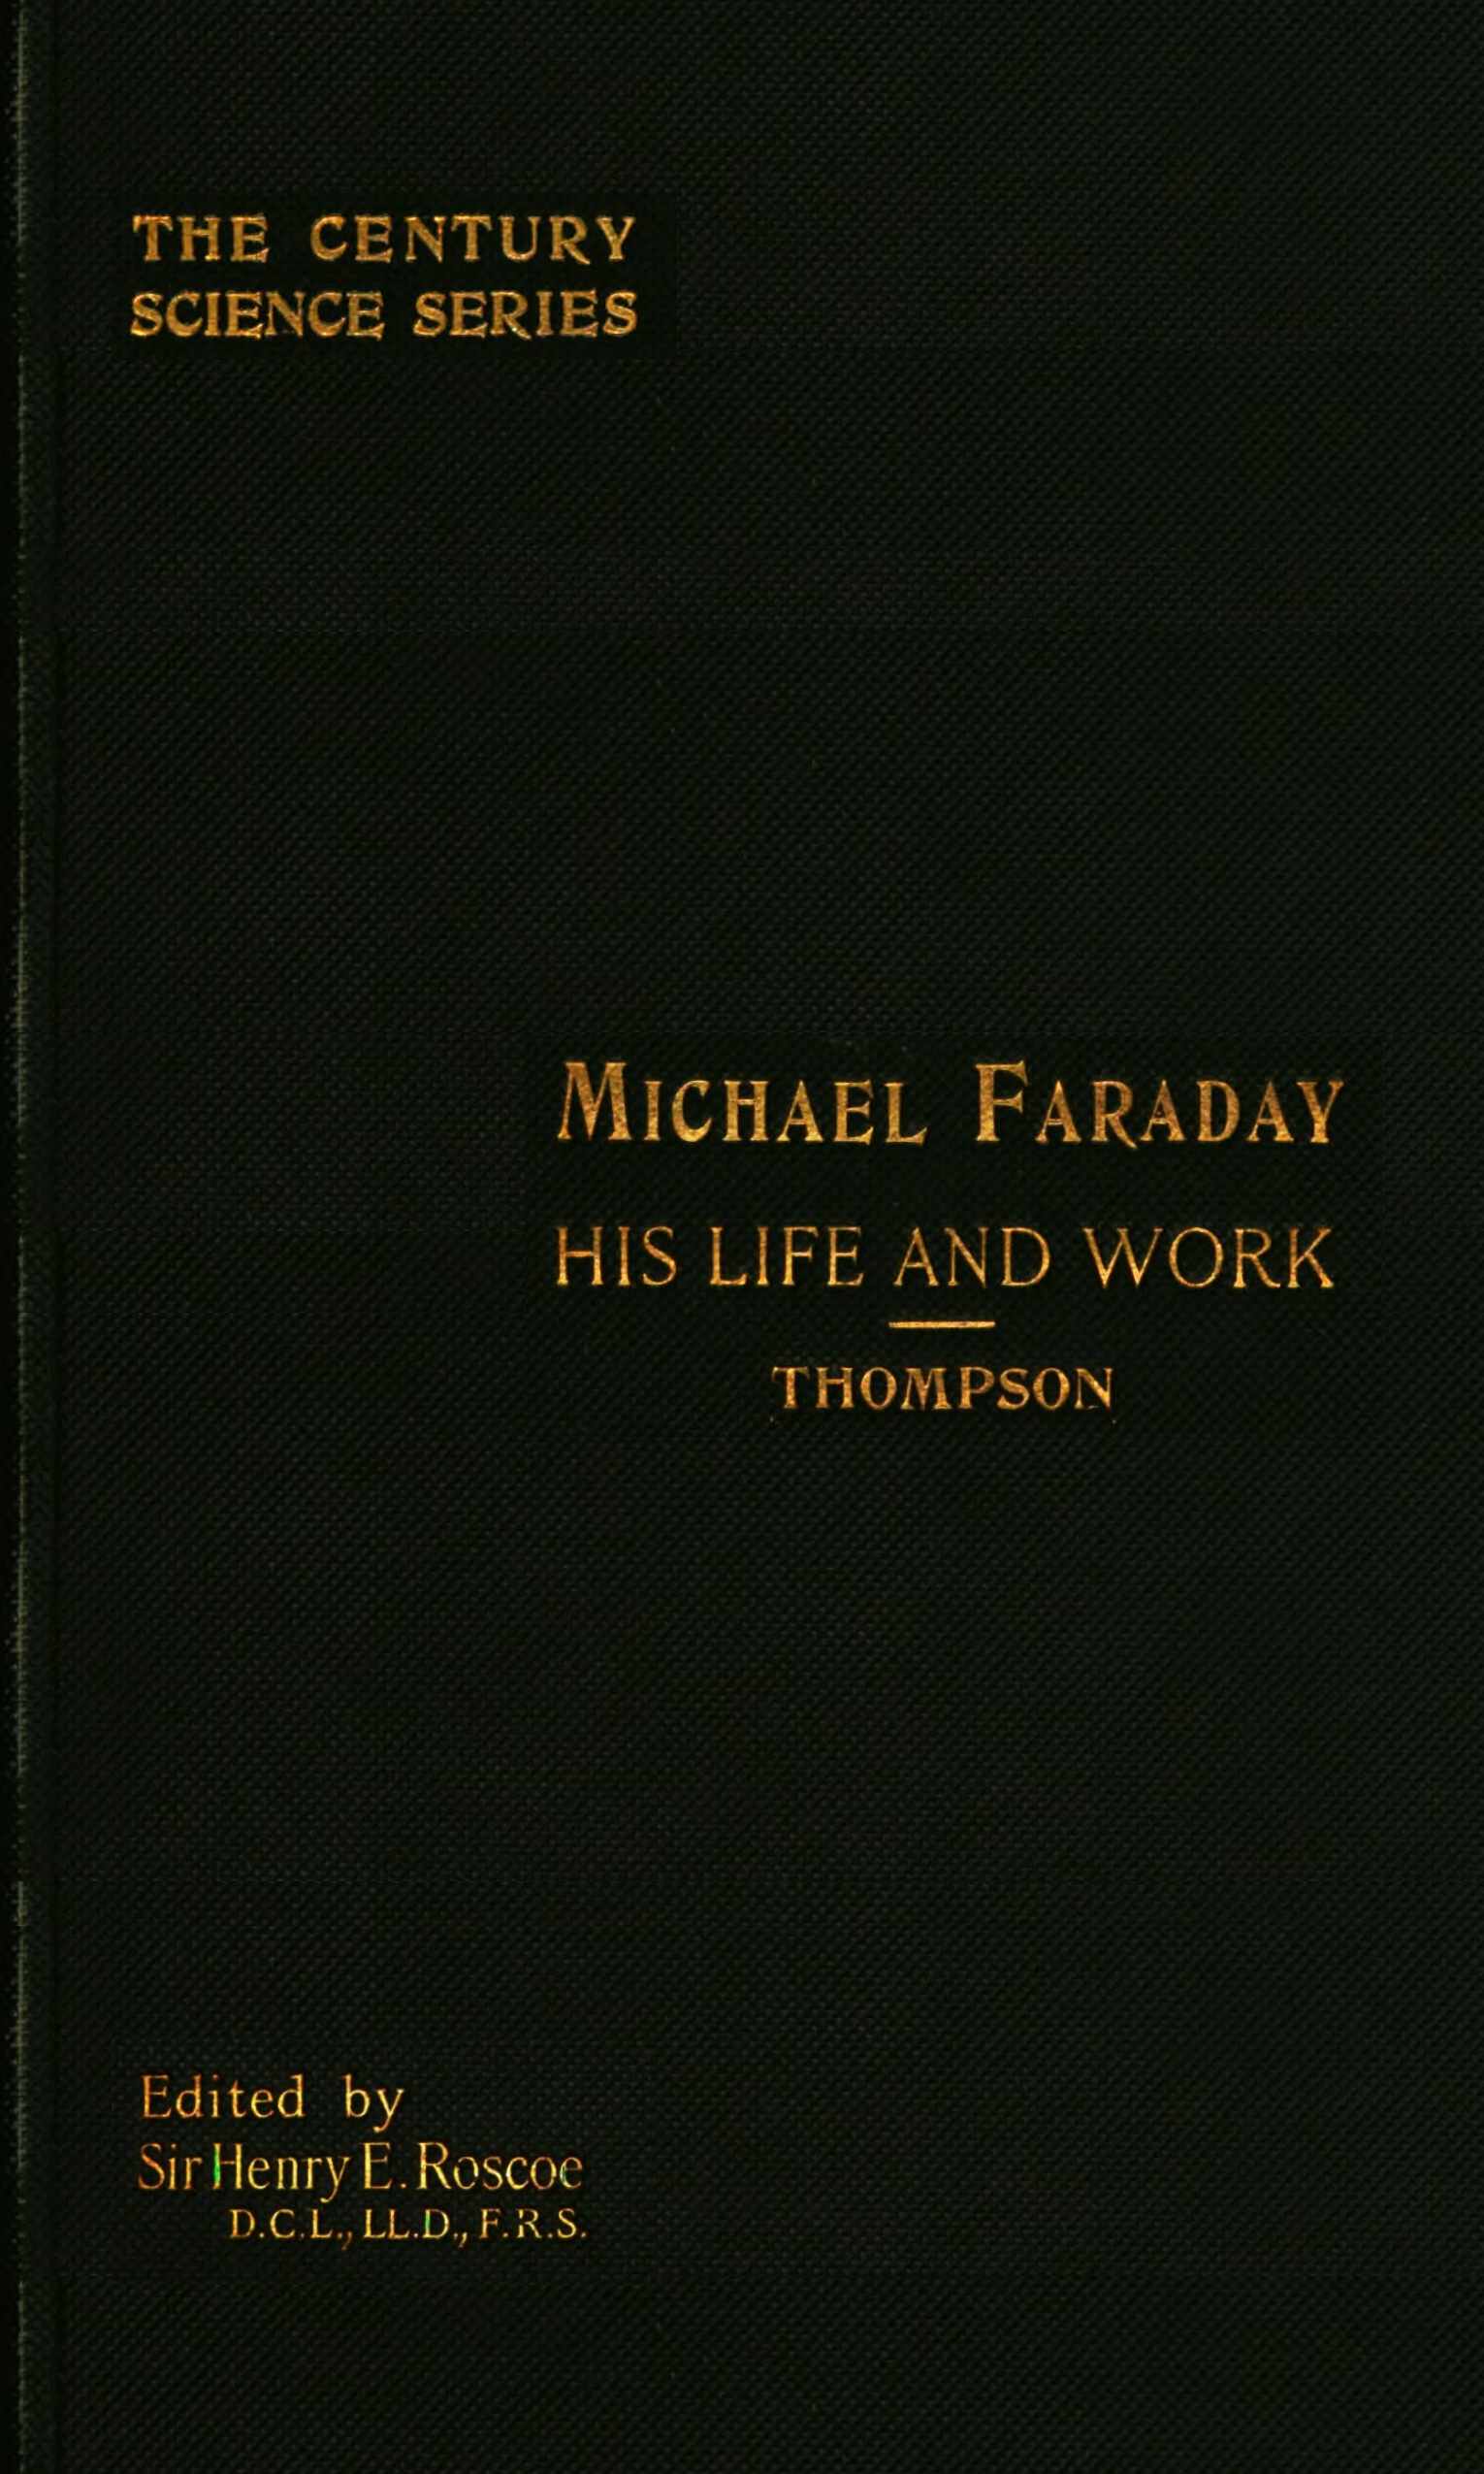 Michael Faraday: His Life and Work, by Silvanus P. Thompson—A Project  Gutenberg eBook